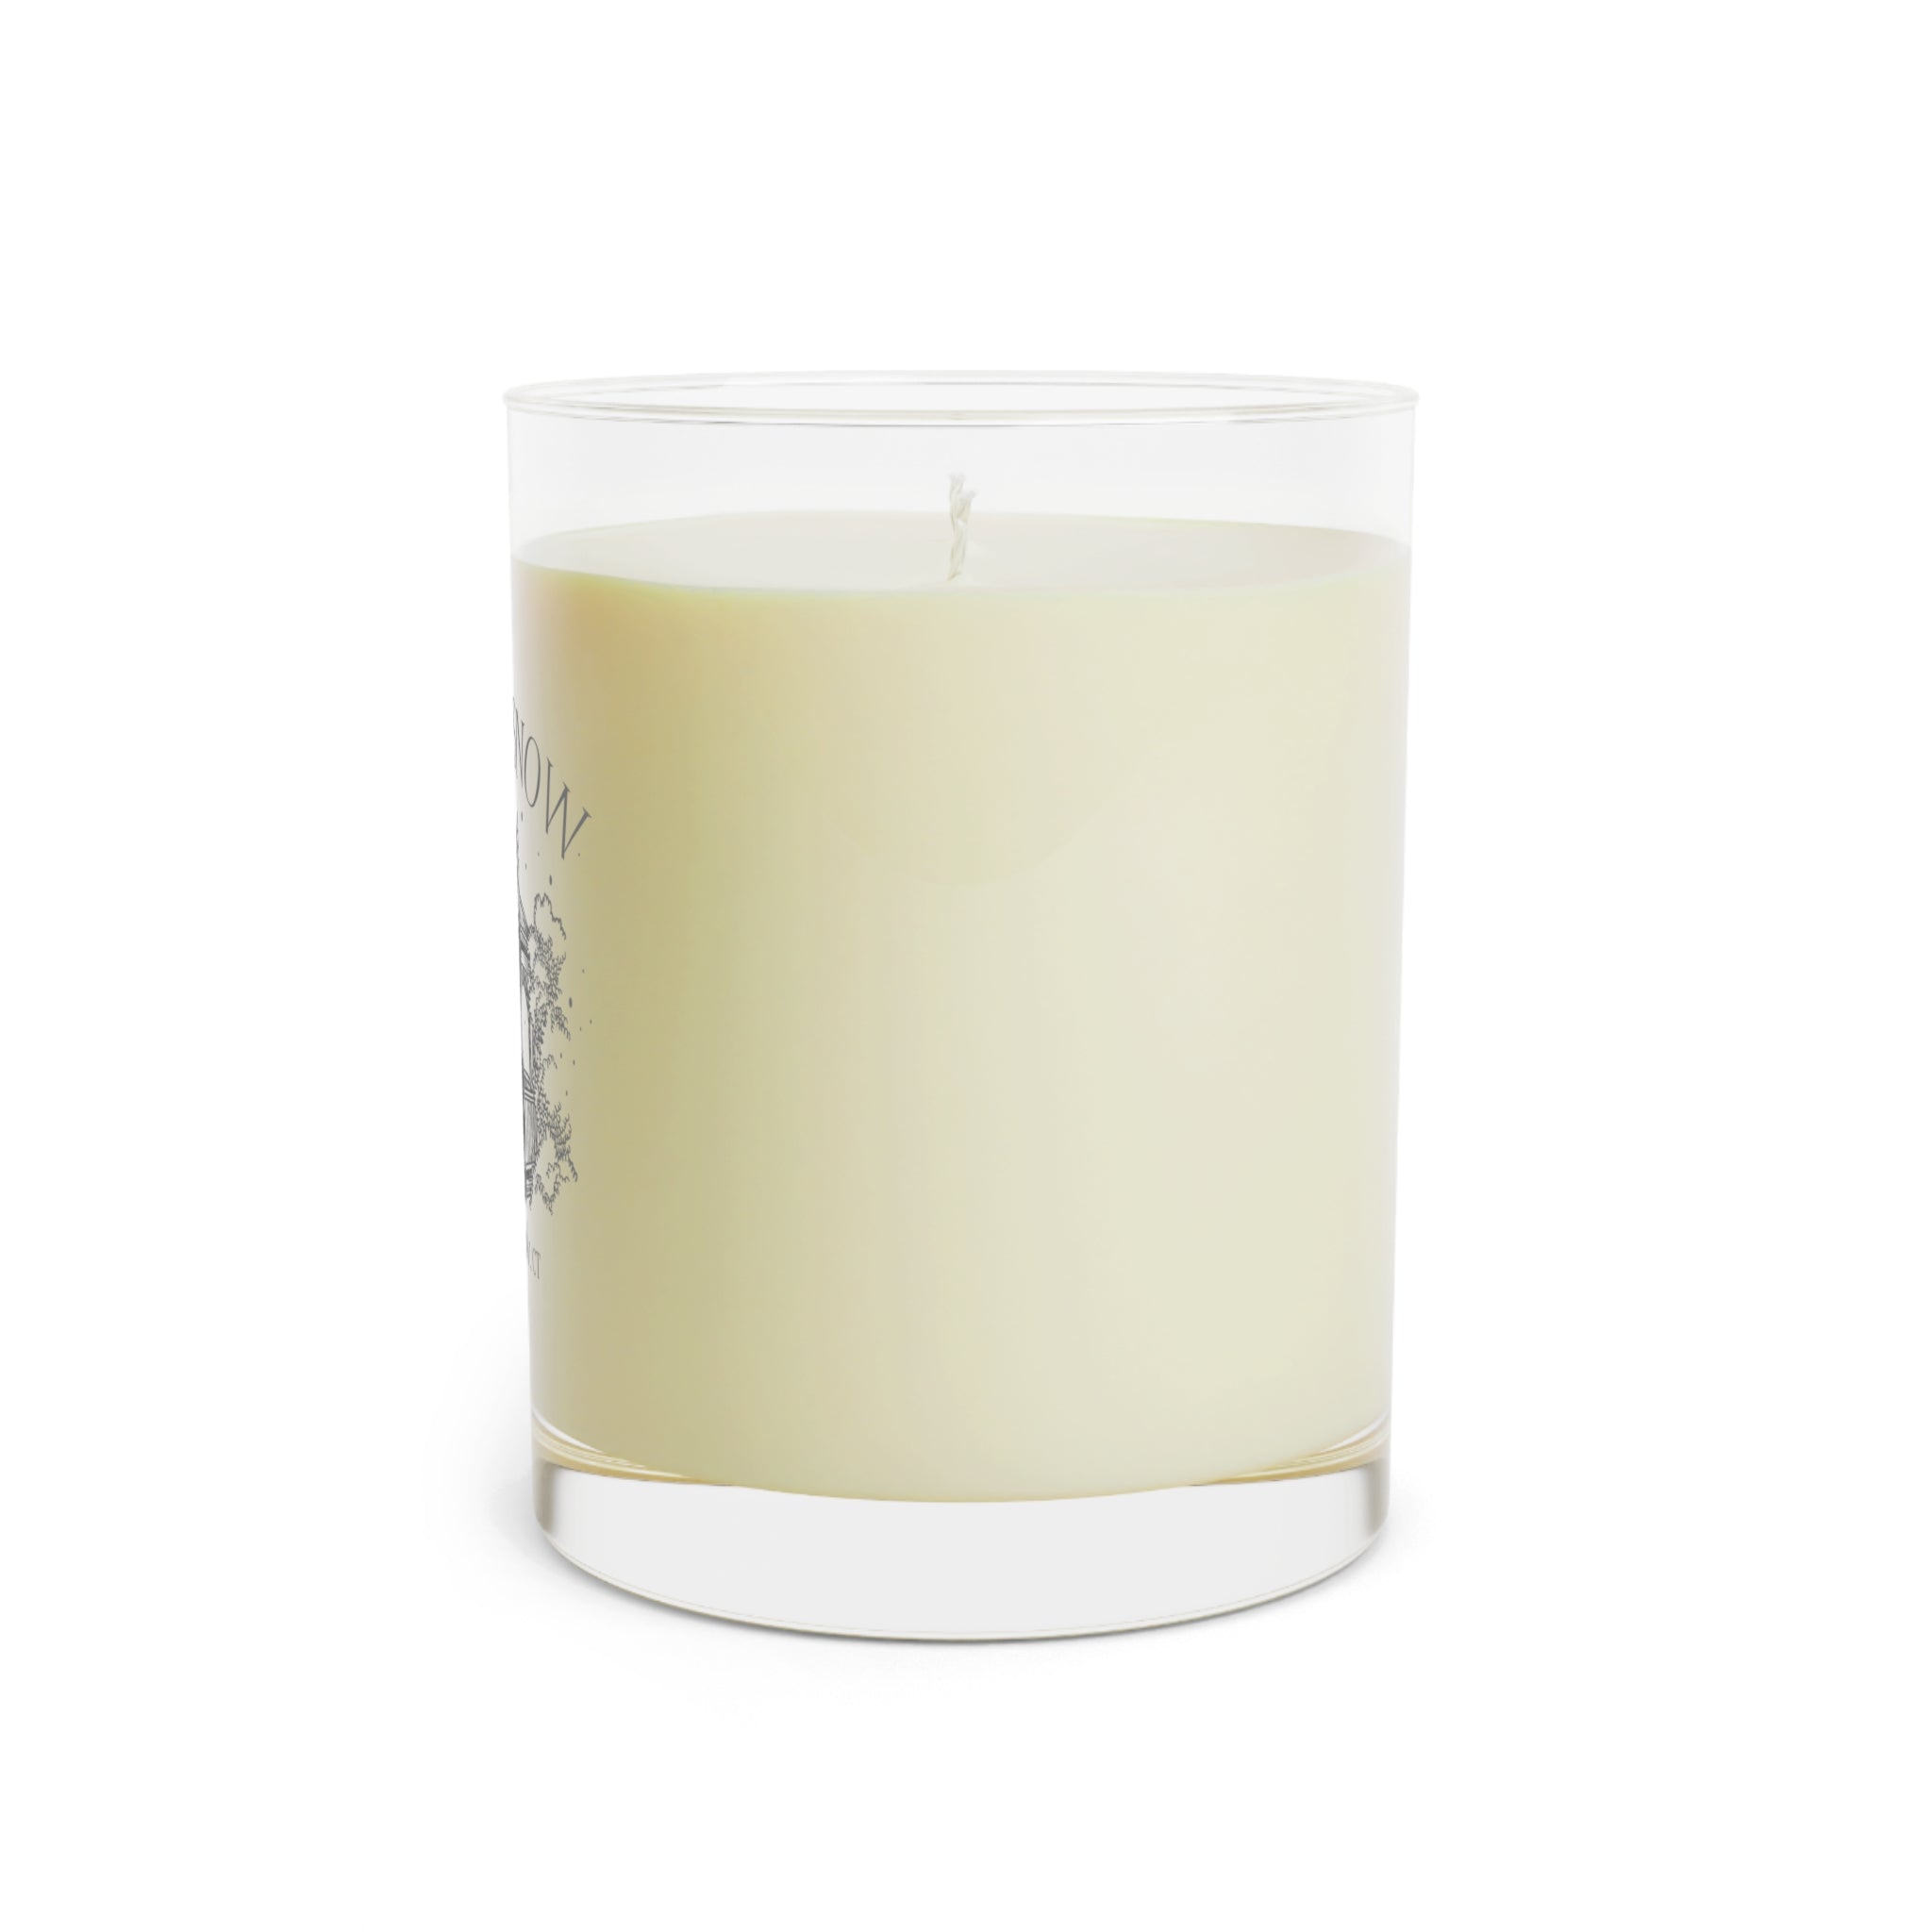 I Smell Snow Scented Candle - Full Glass, 11oz